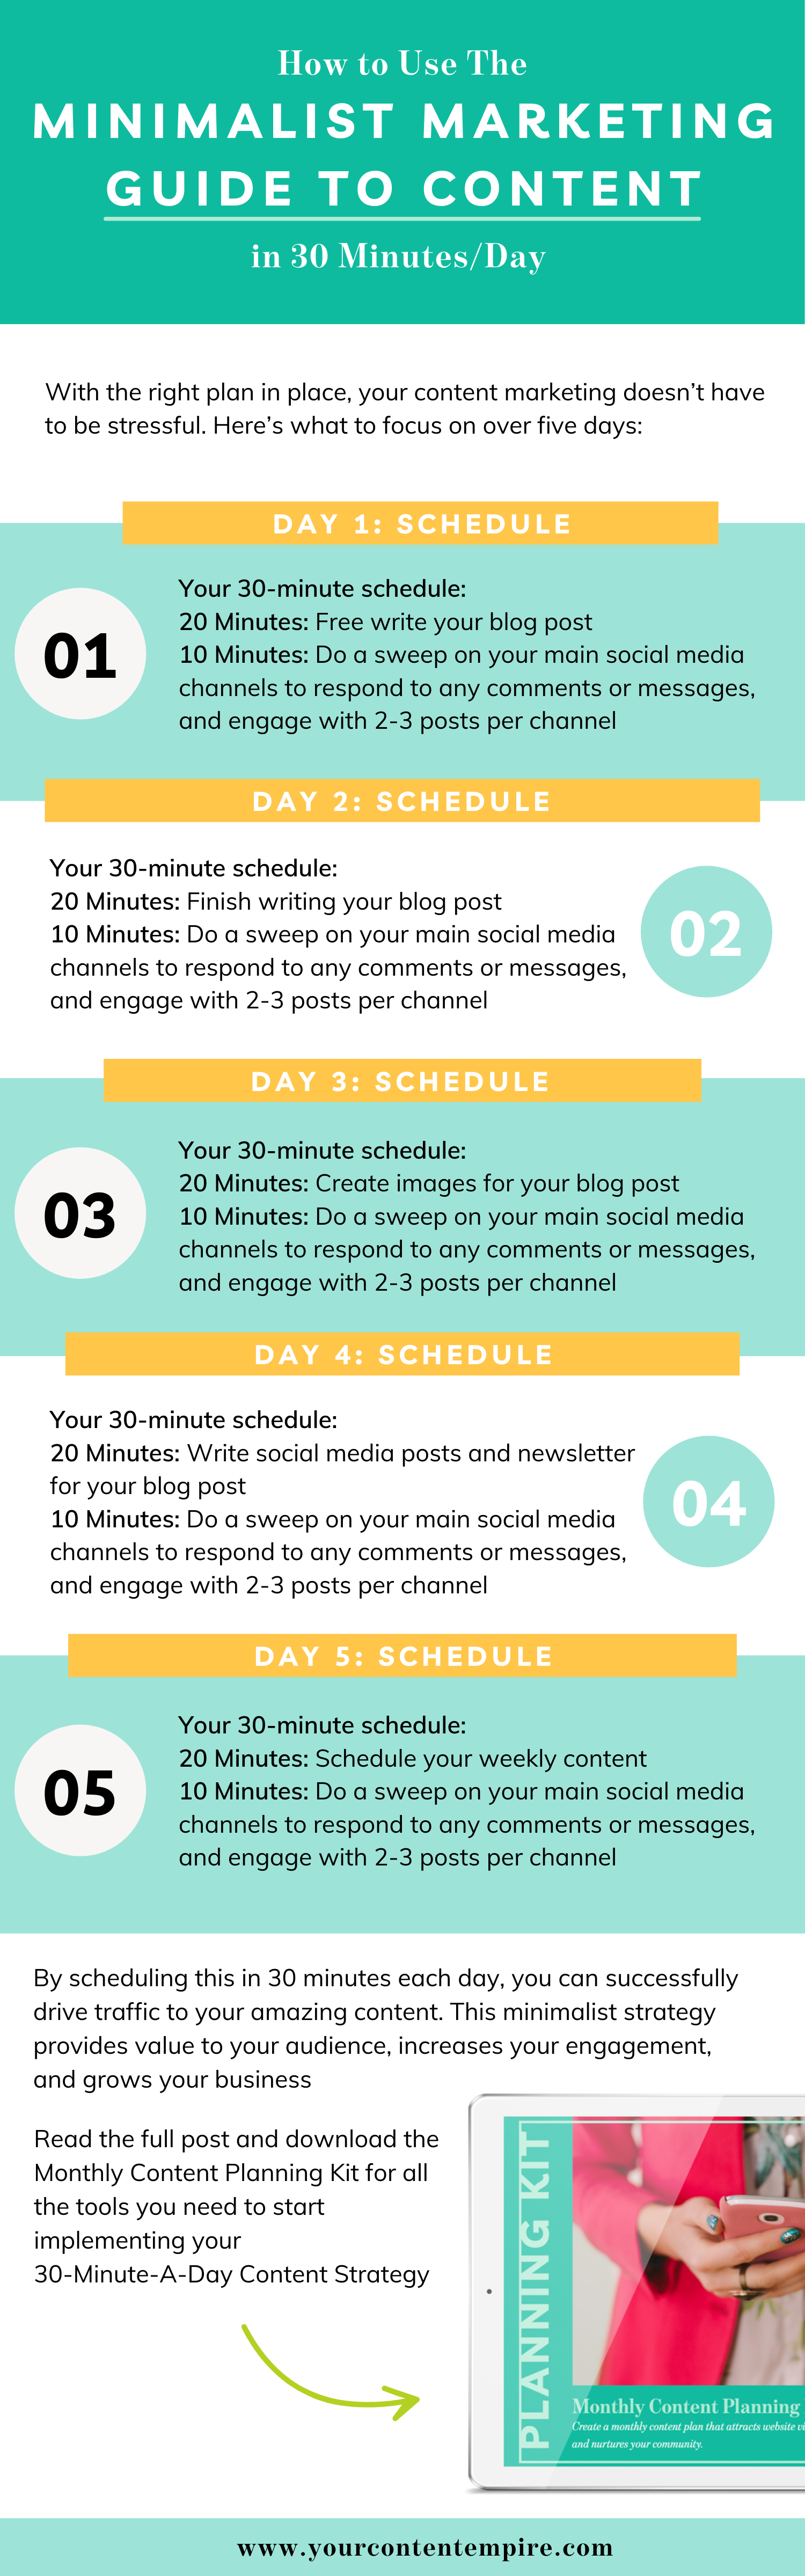 The Minimalist Marketing Guide to Content in 30 Minutes/Day by Your Content Empire